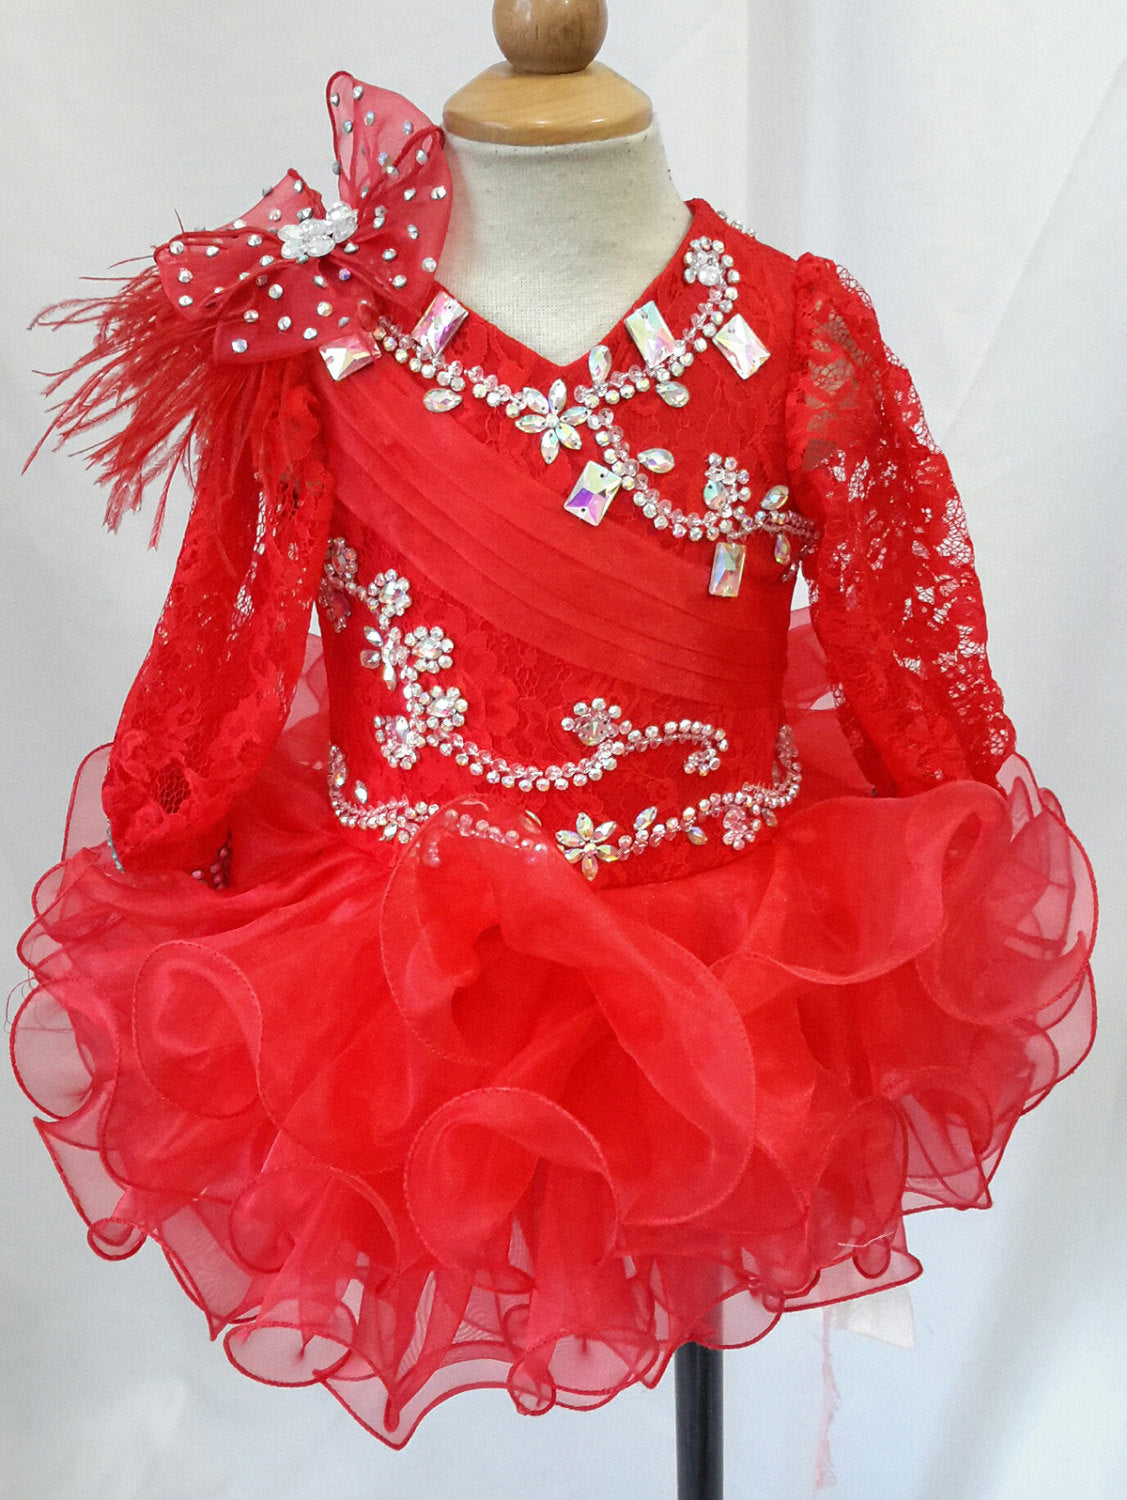 Infant/toddler/baby/children/kids Girl's Pageant Dress for birthday,Christmas,bridal,gift,party, 1~4T G068A - ToddlerPageantDress